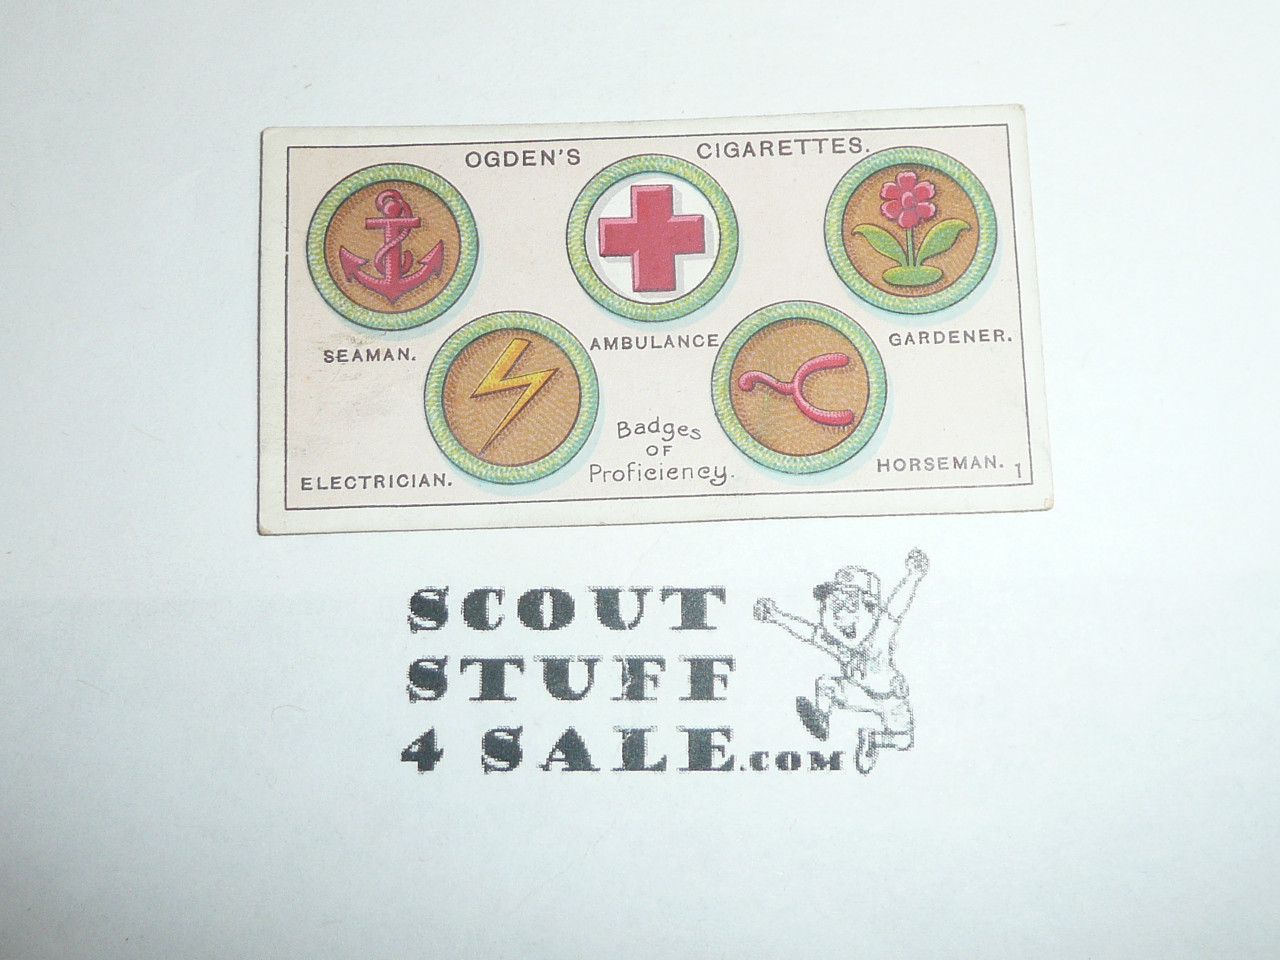 Ogden Tabacco Company Premium Card, First Boy Scout Series of 50 (Blue Backs), Card #42 Scouts' Badges #1, 1911